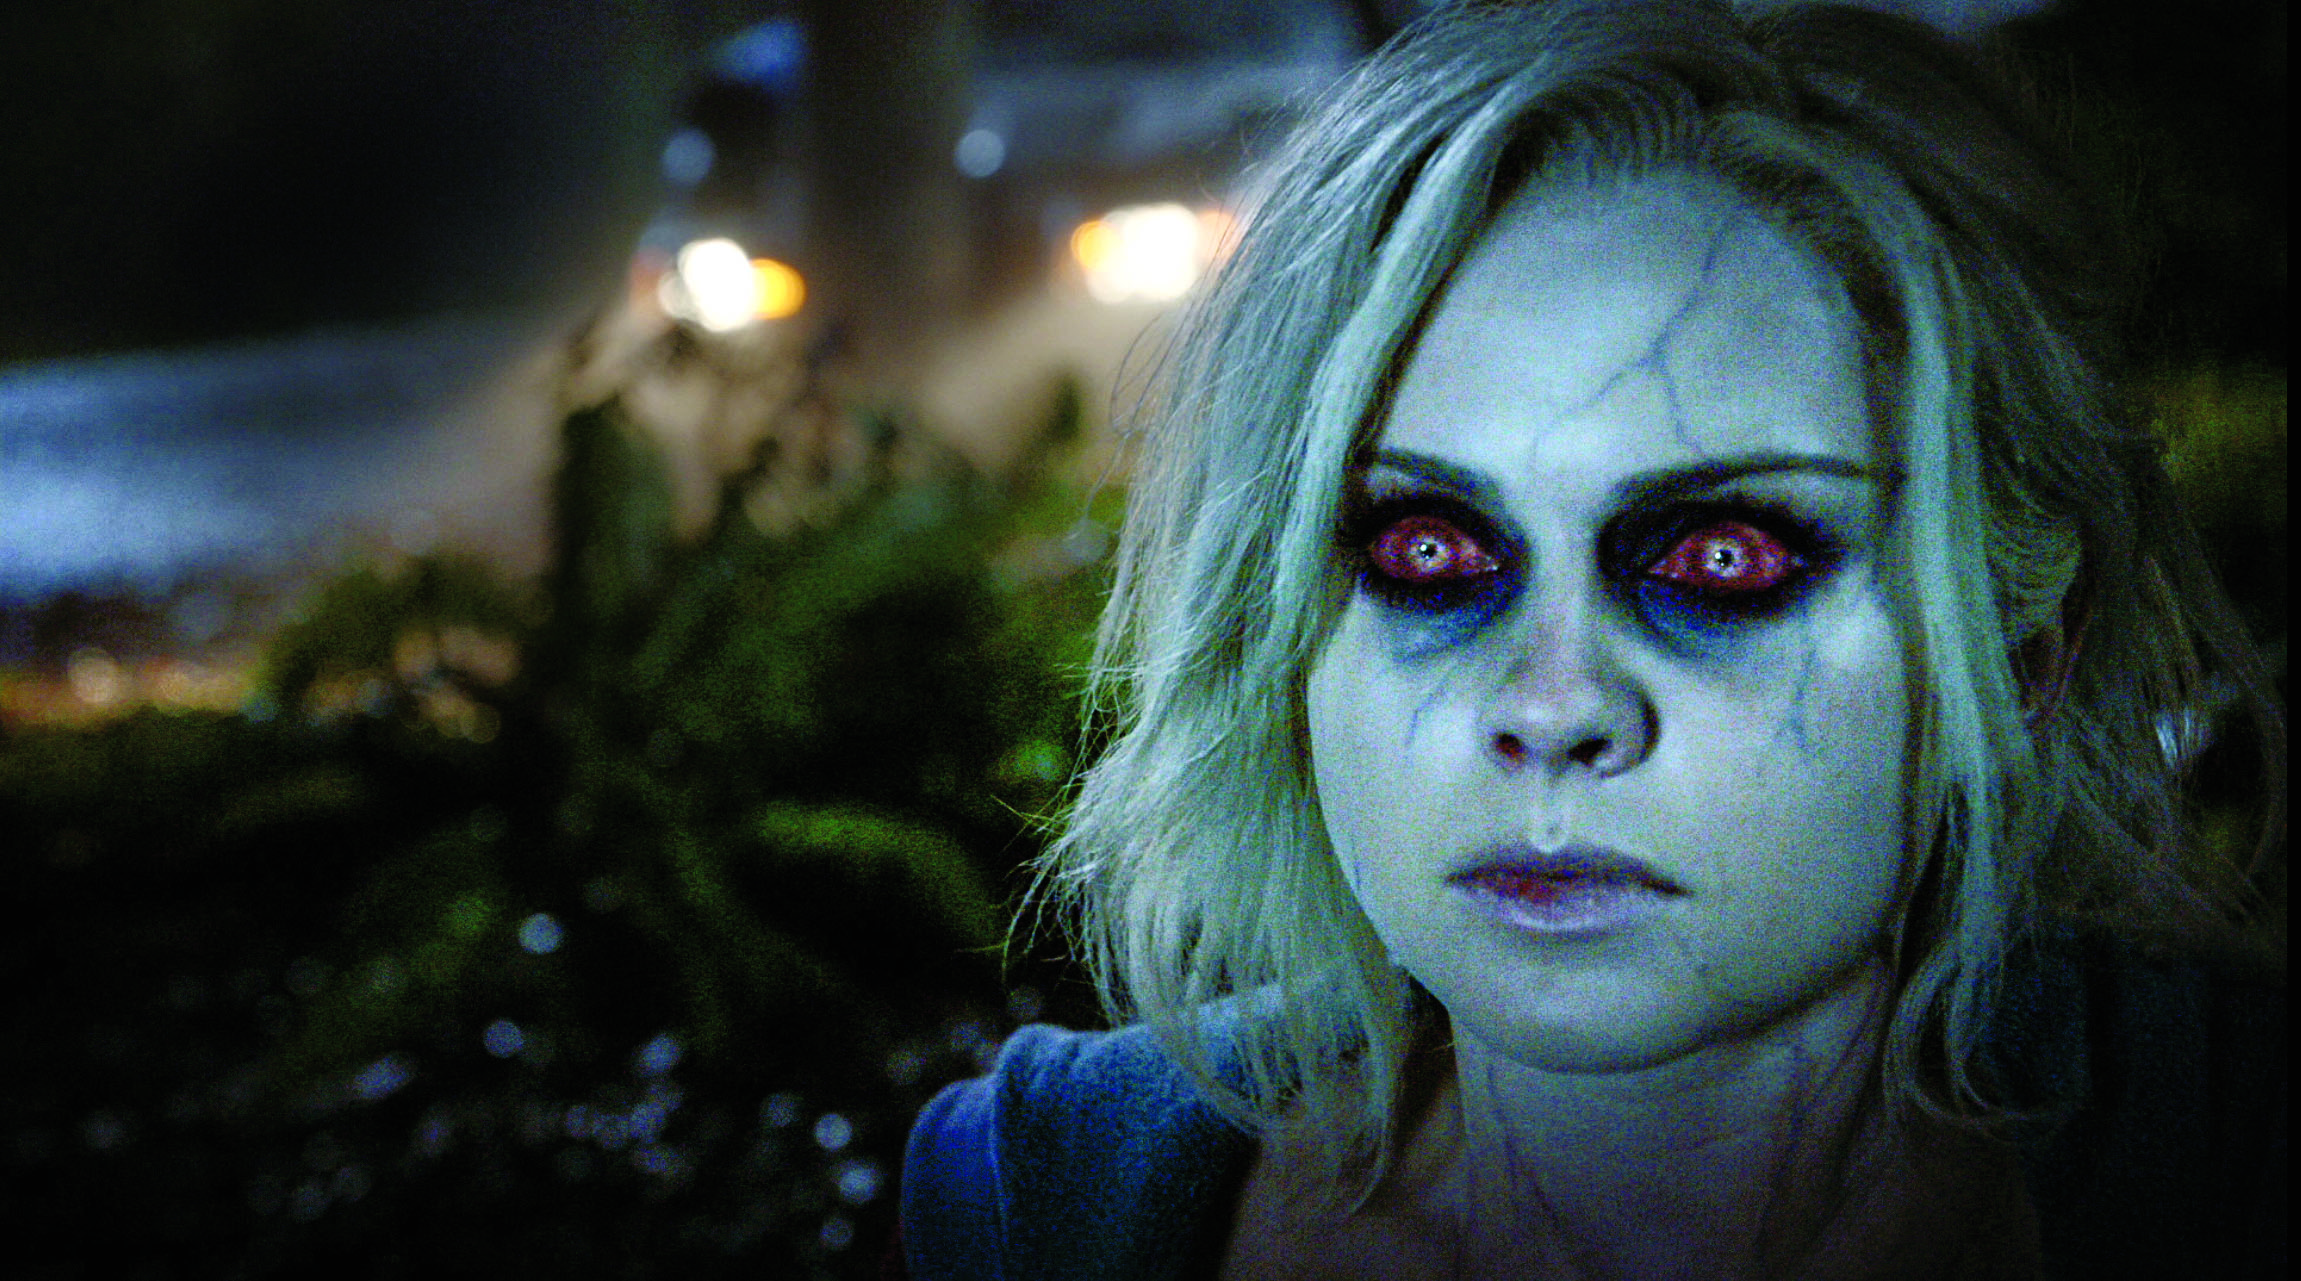 How iZombie Makeup Turns Rose McIver Into the Undead